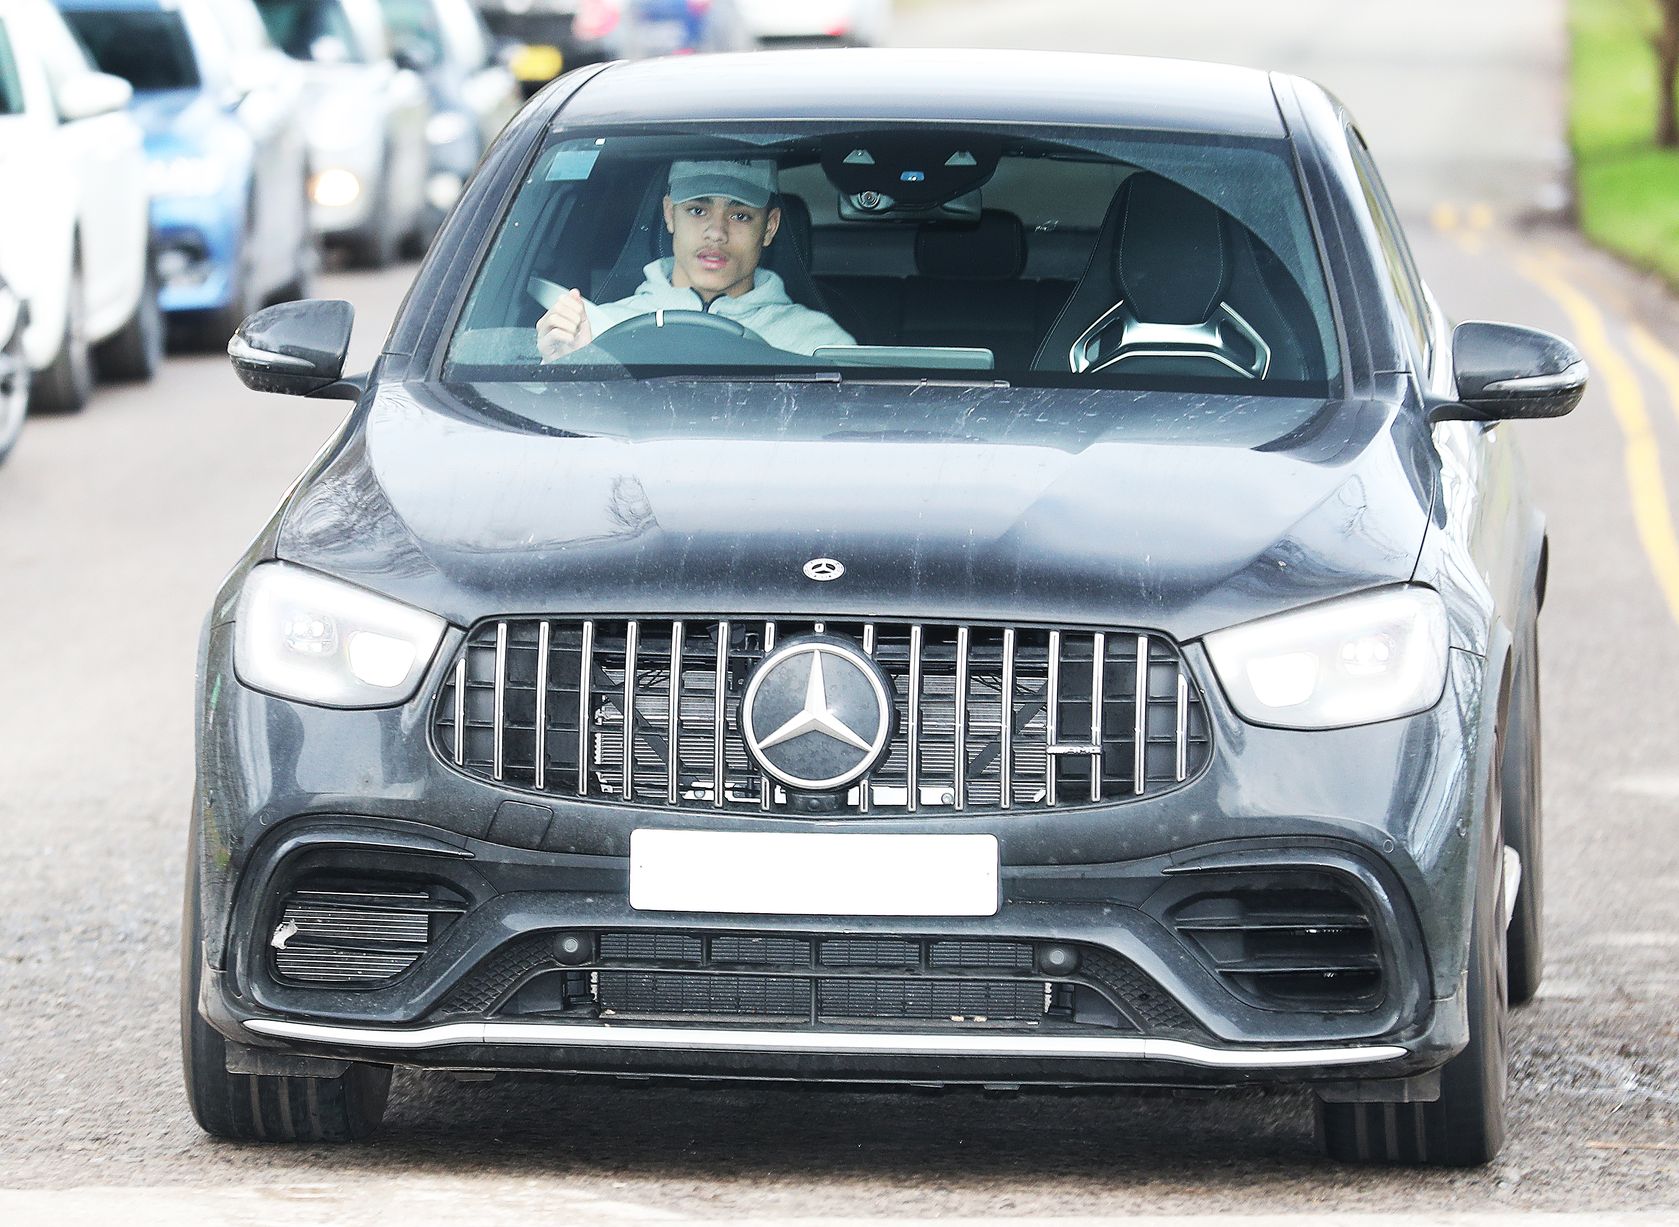 Scott McTominay among Manchester United players arriving at training after Man City win - Bóng Đá